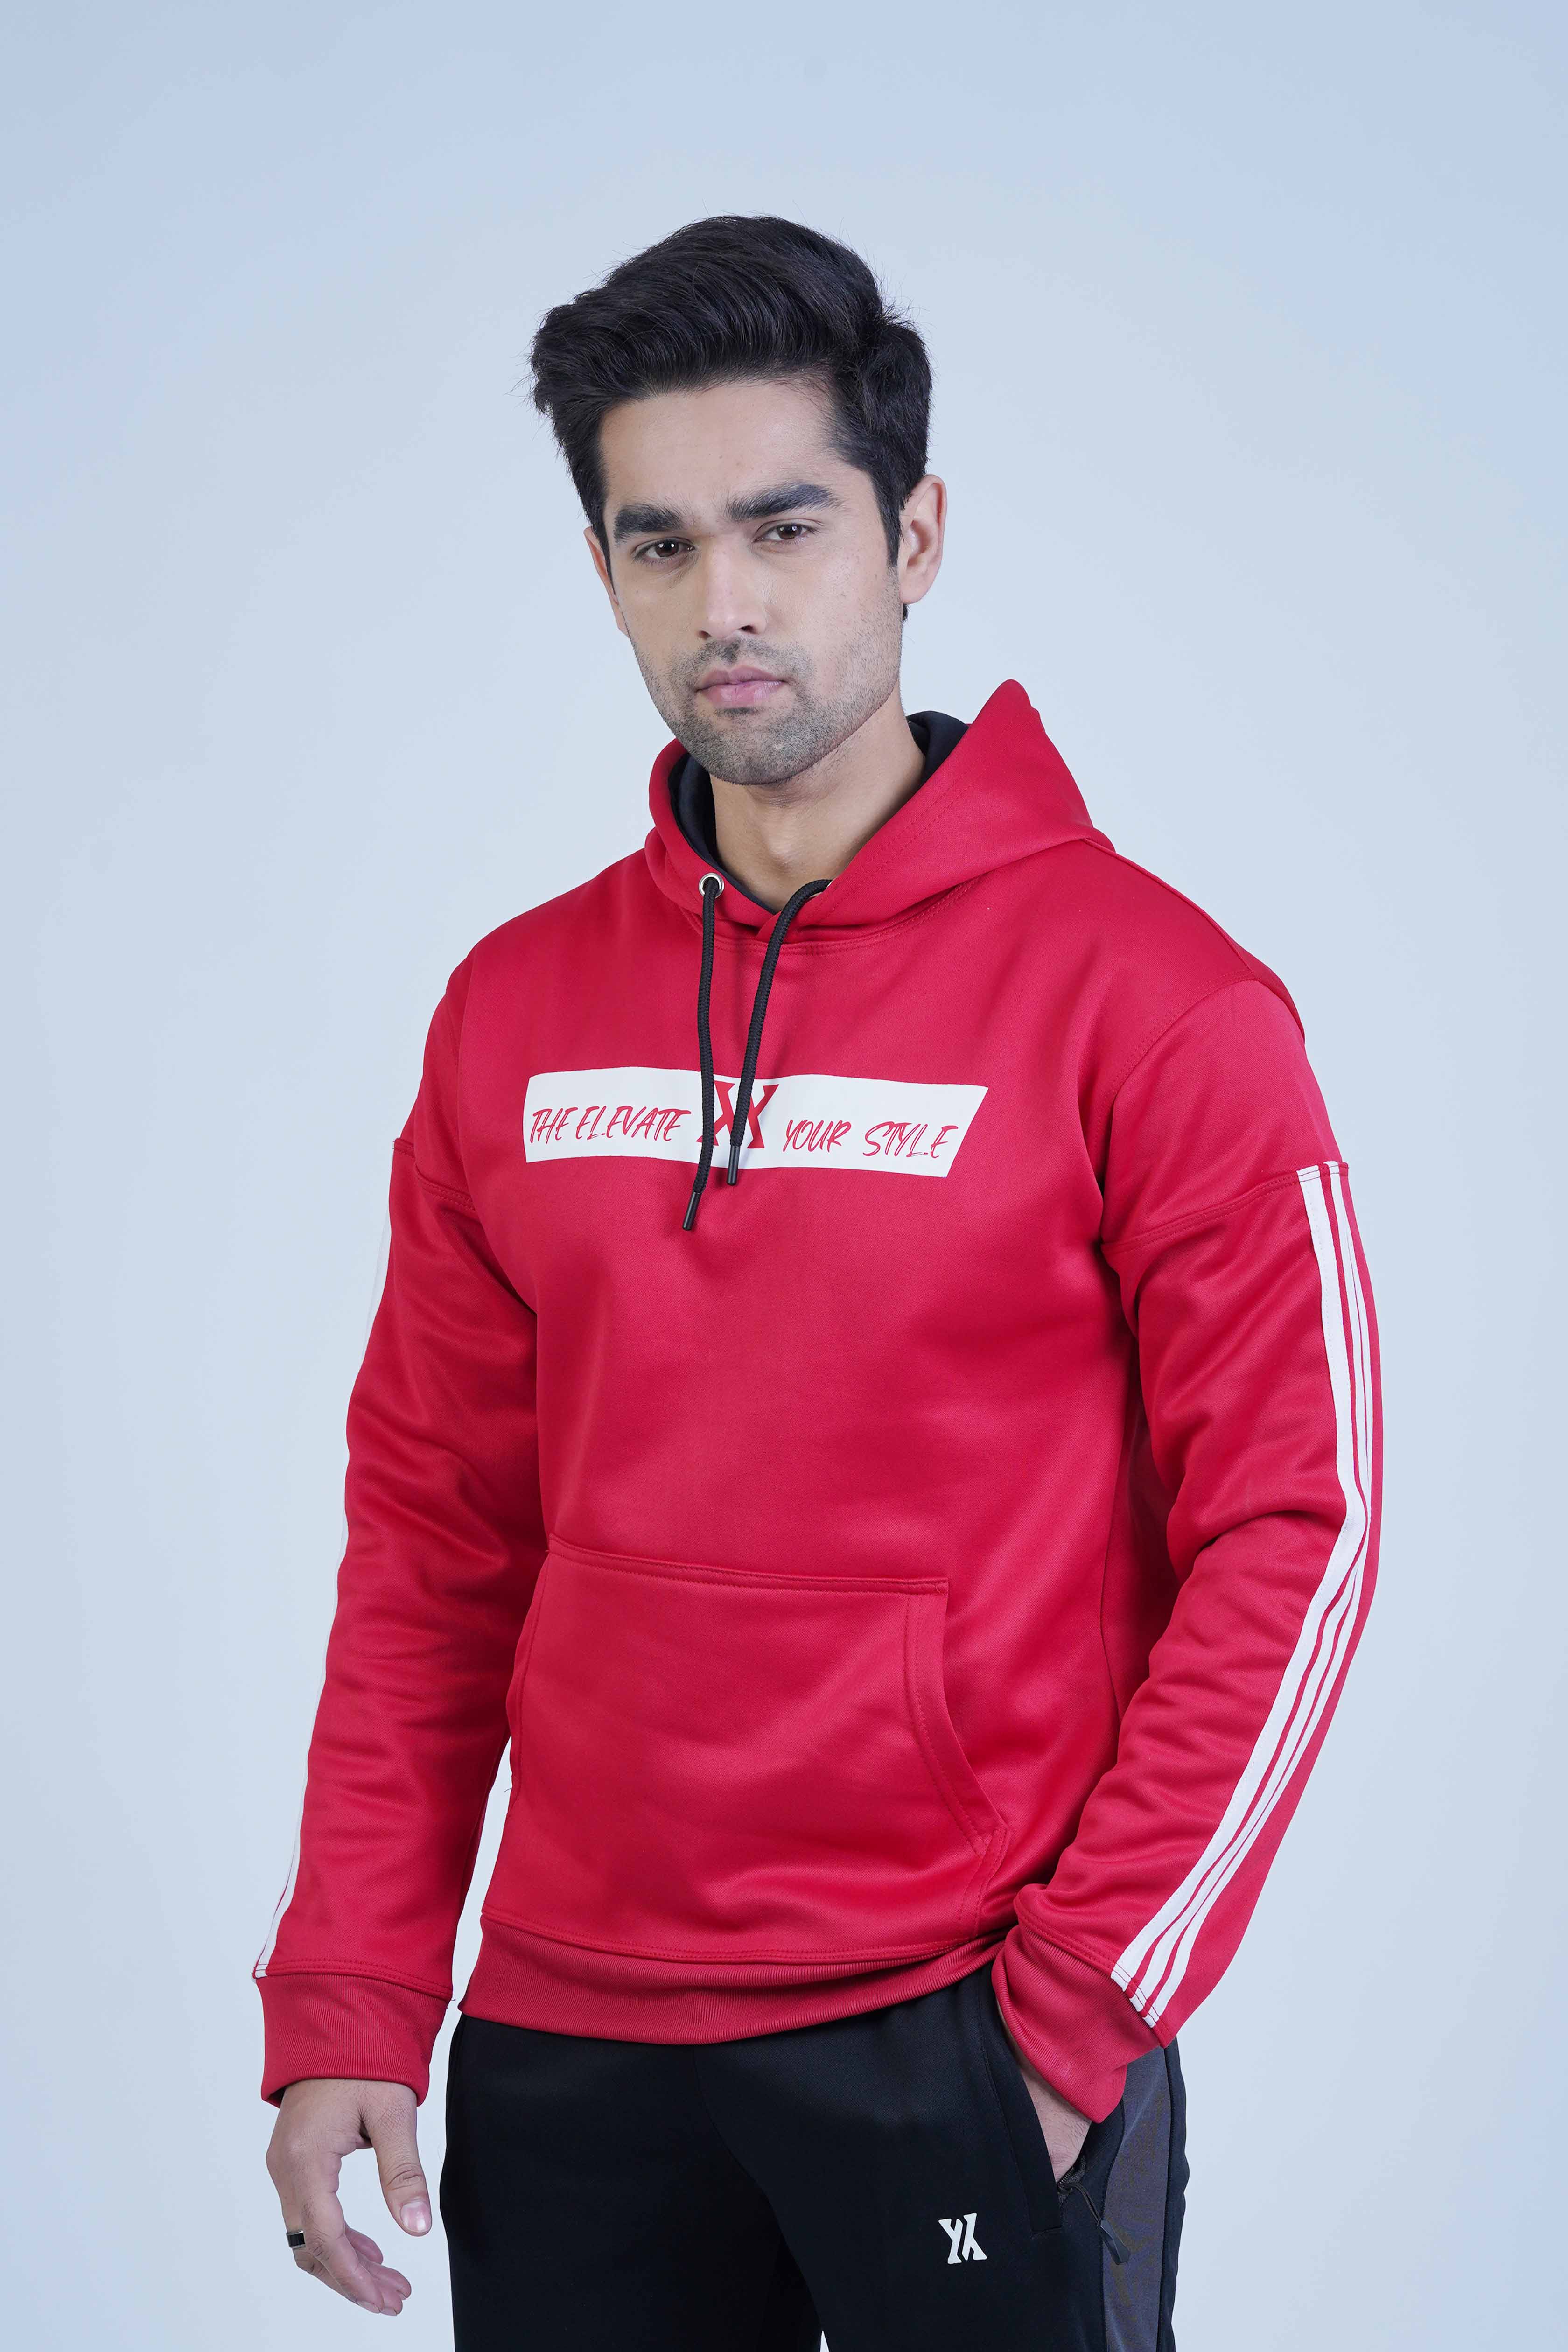 Red Hoodie from The Xea Men's Fashion - Urban 2.0